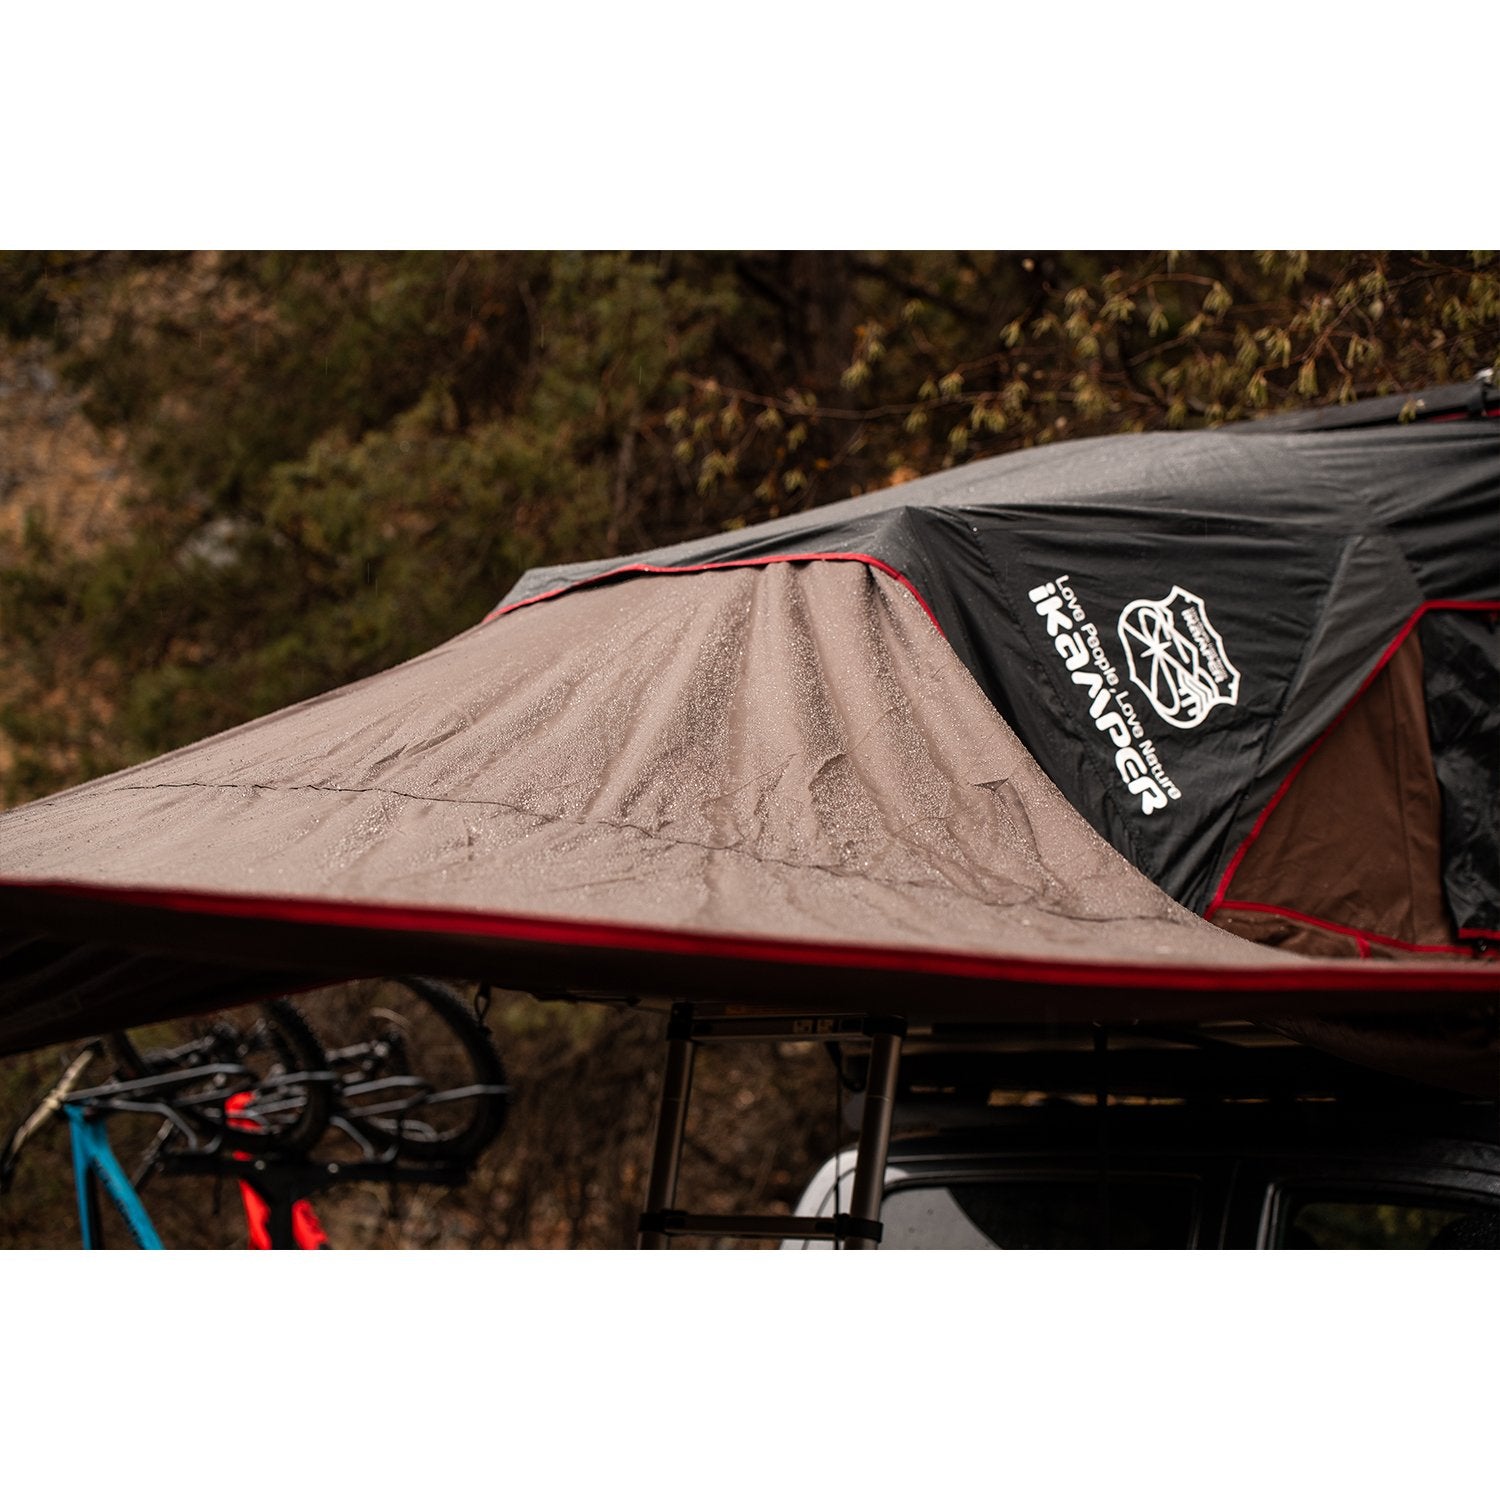 [AWNING] - BIGTENT